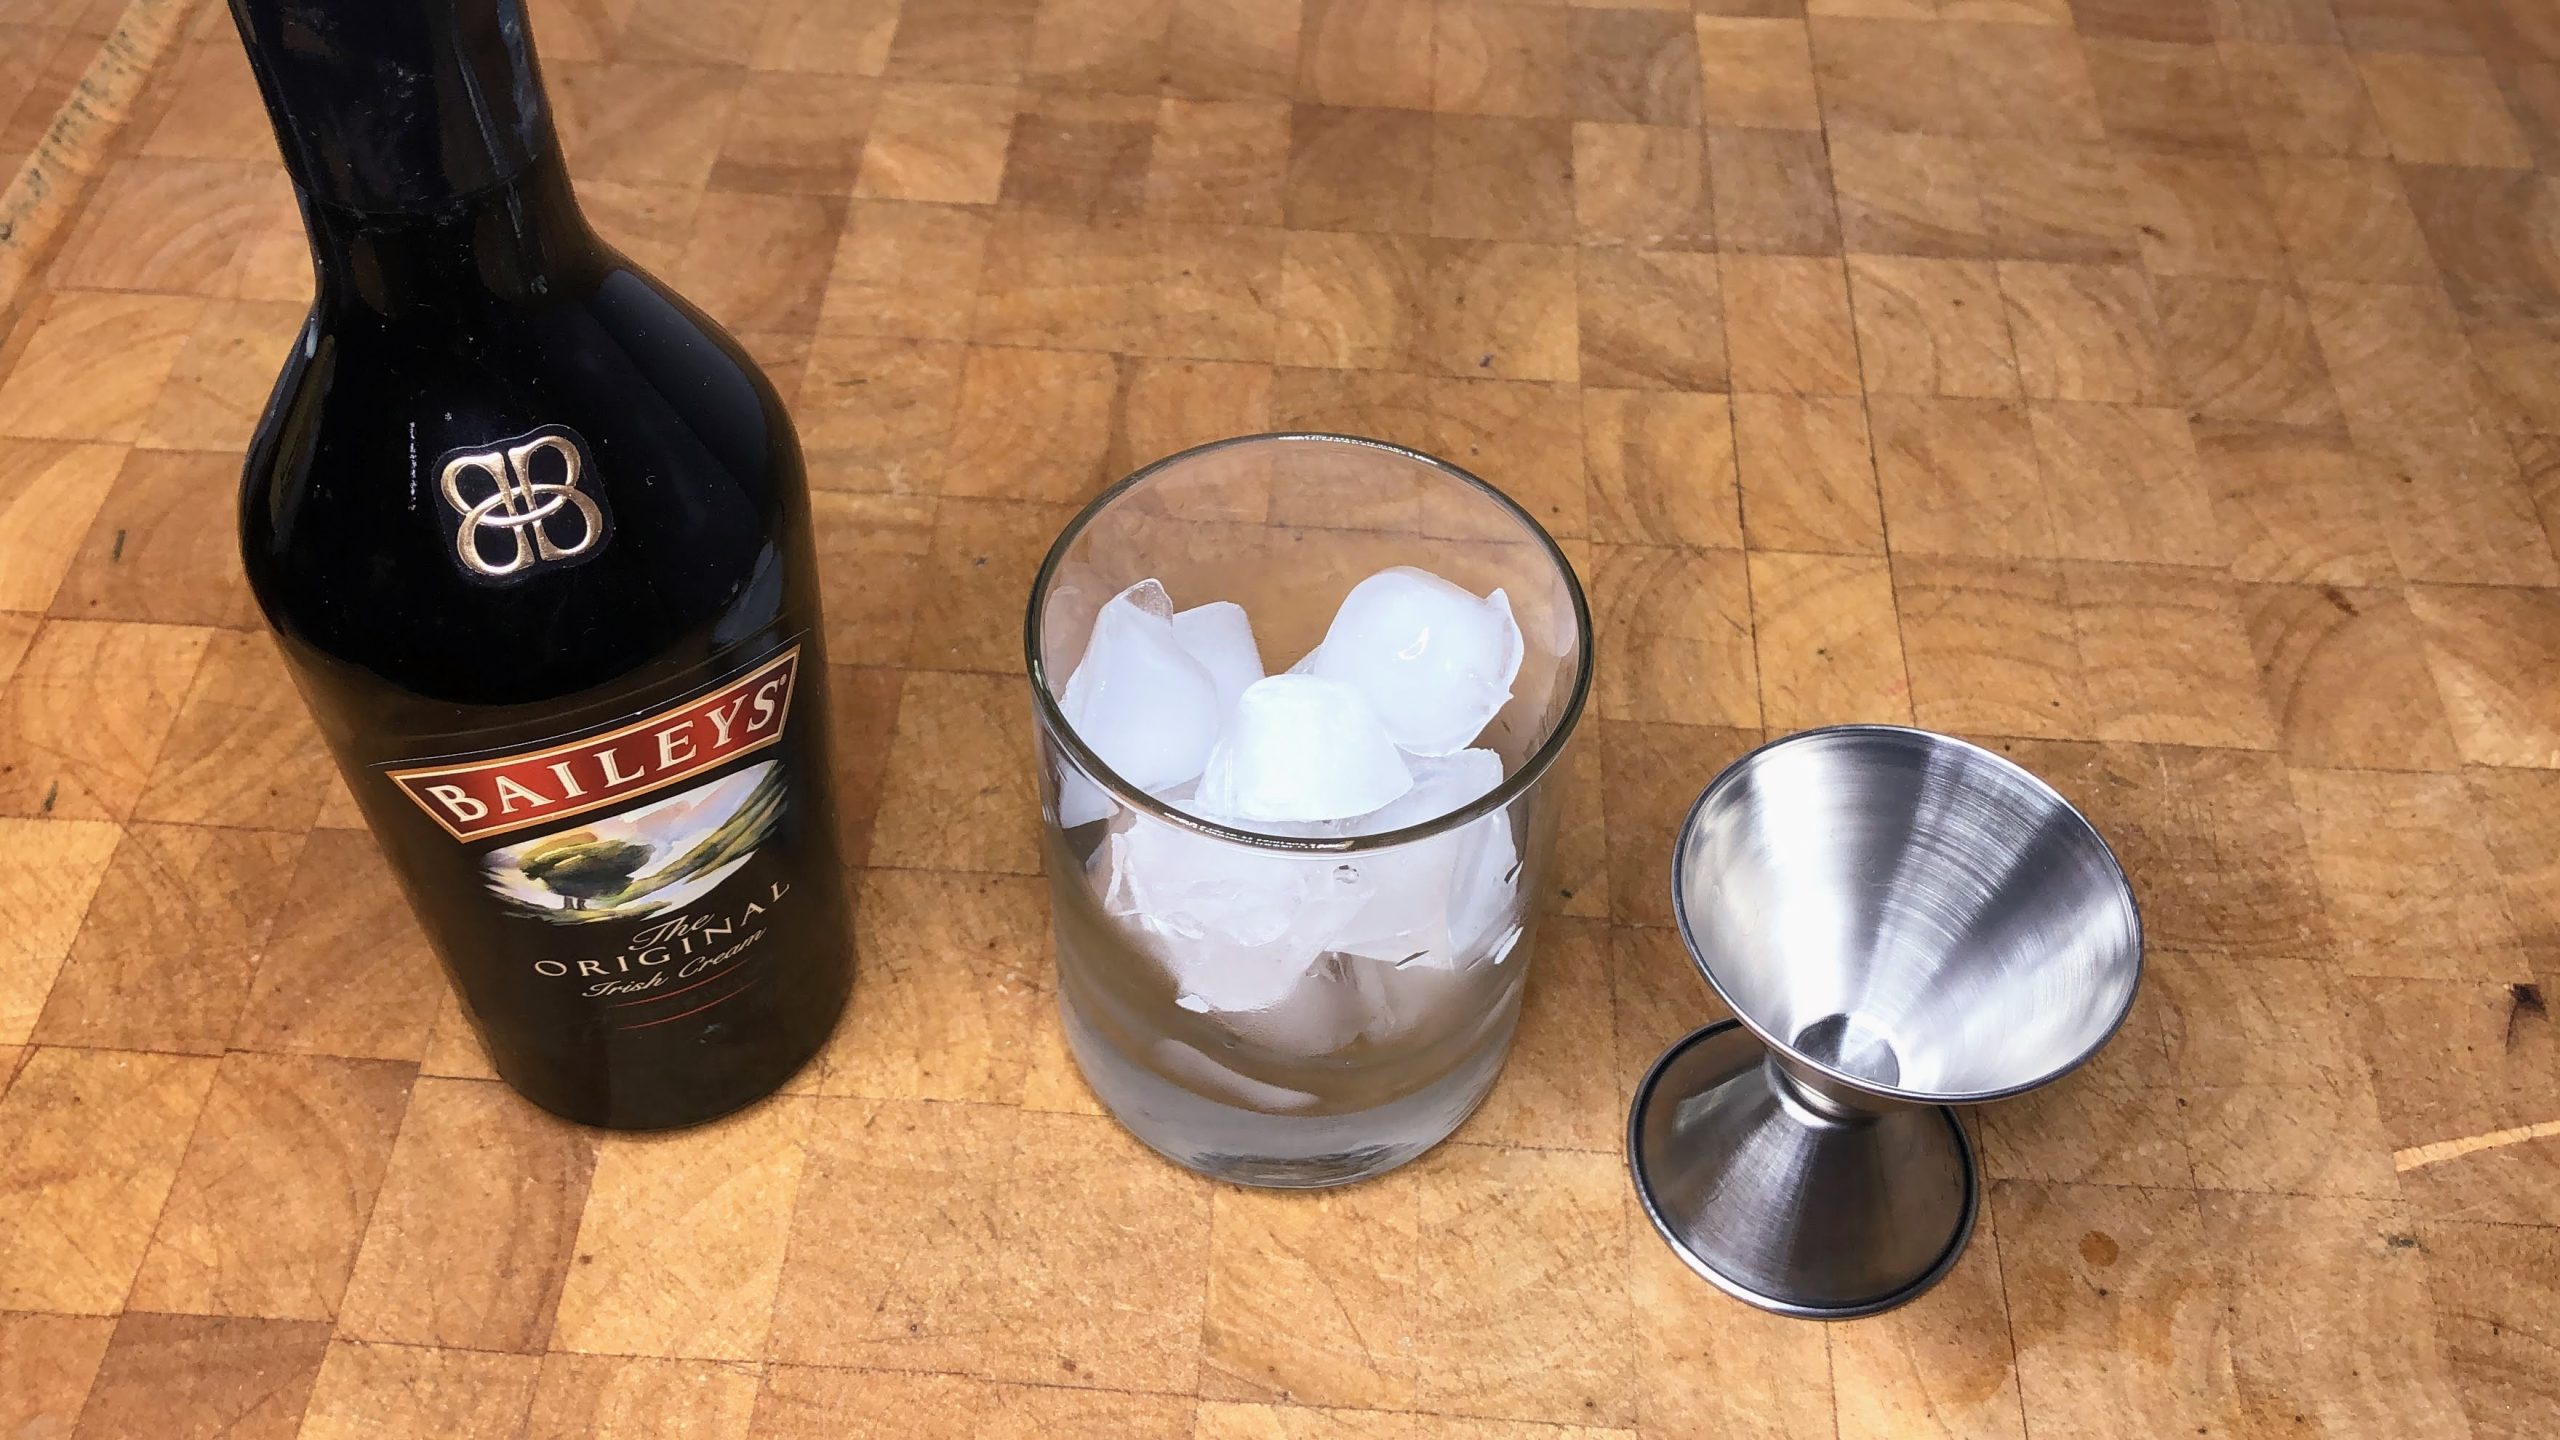 Bottle of baileys next to a rocks glass with ice and a jigger.